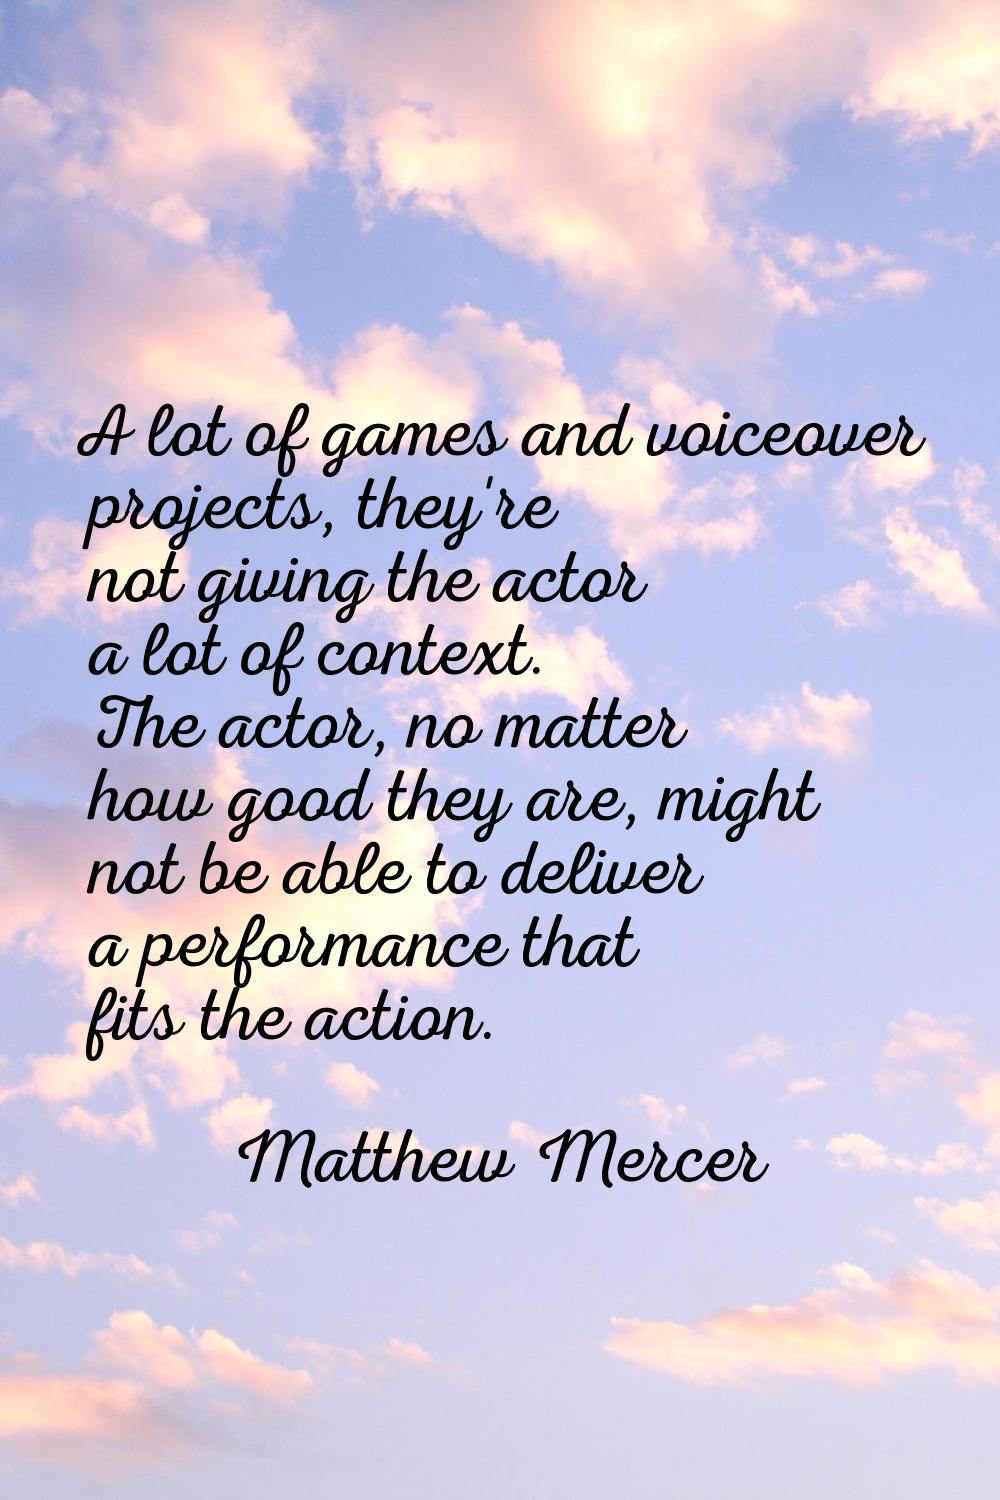 A lot of games and voiceover projects, they're not giving the actor a lot of context. The actor, no